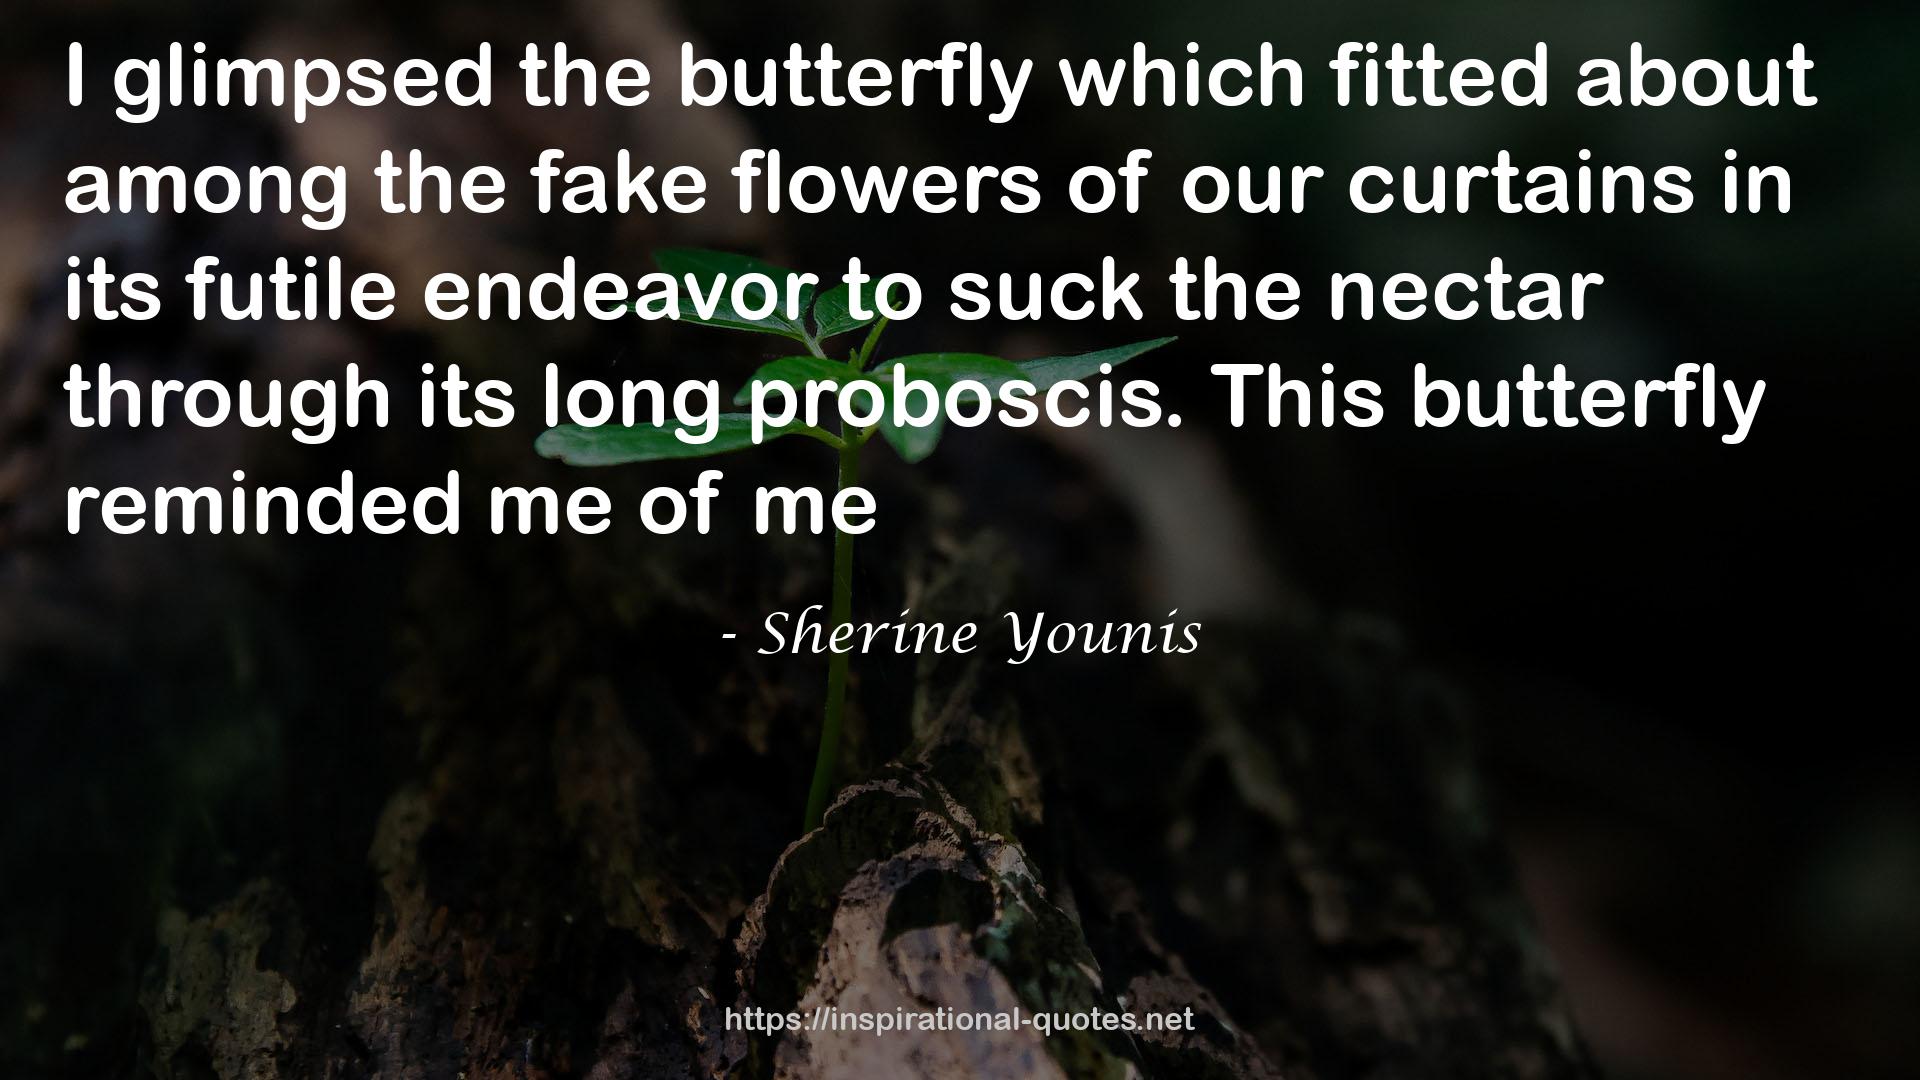 Sherine Younis QUOTES